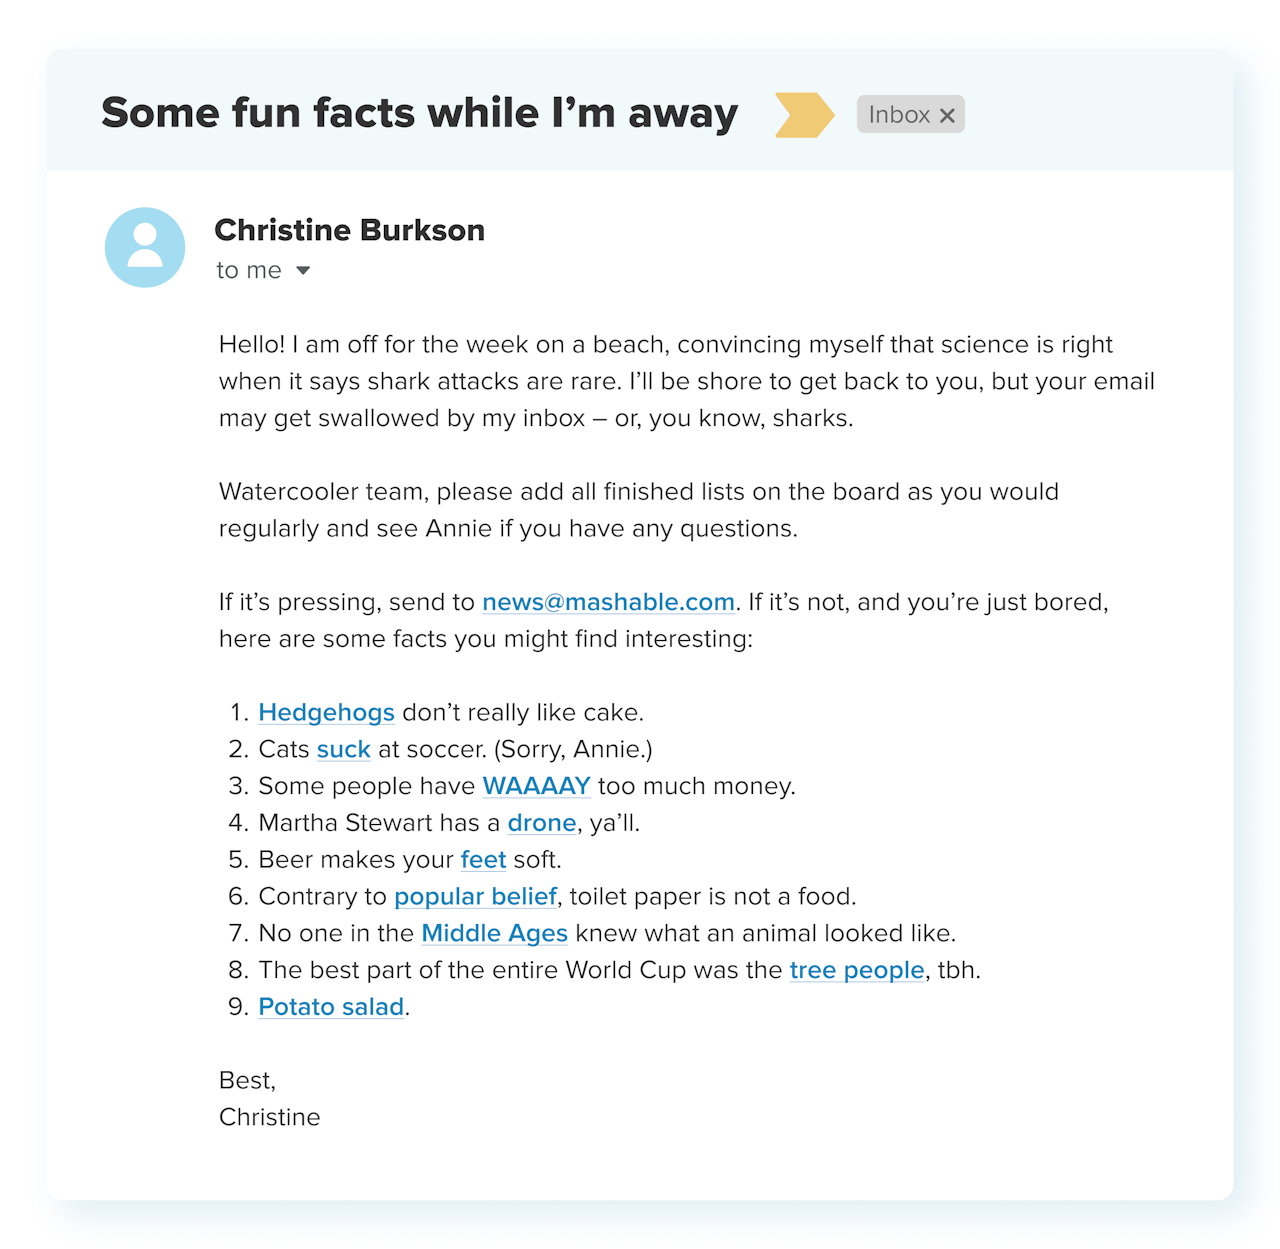 out of office message example: Use a fun fact in your autoresponder